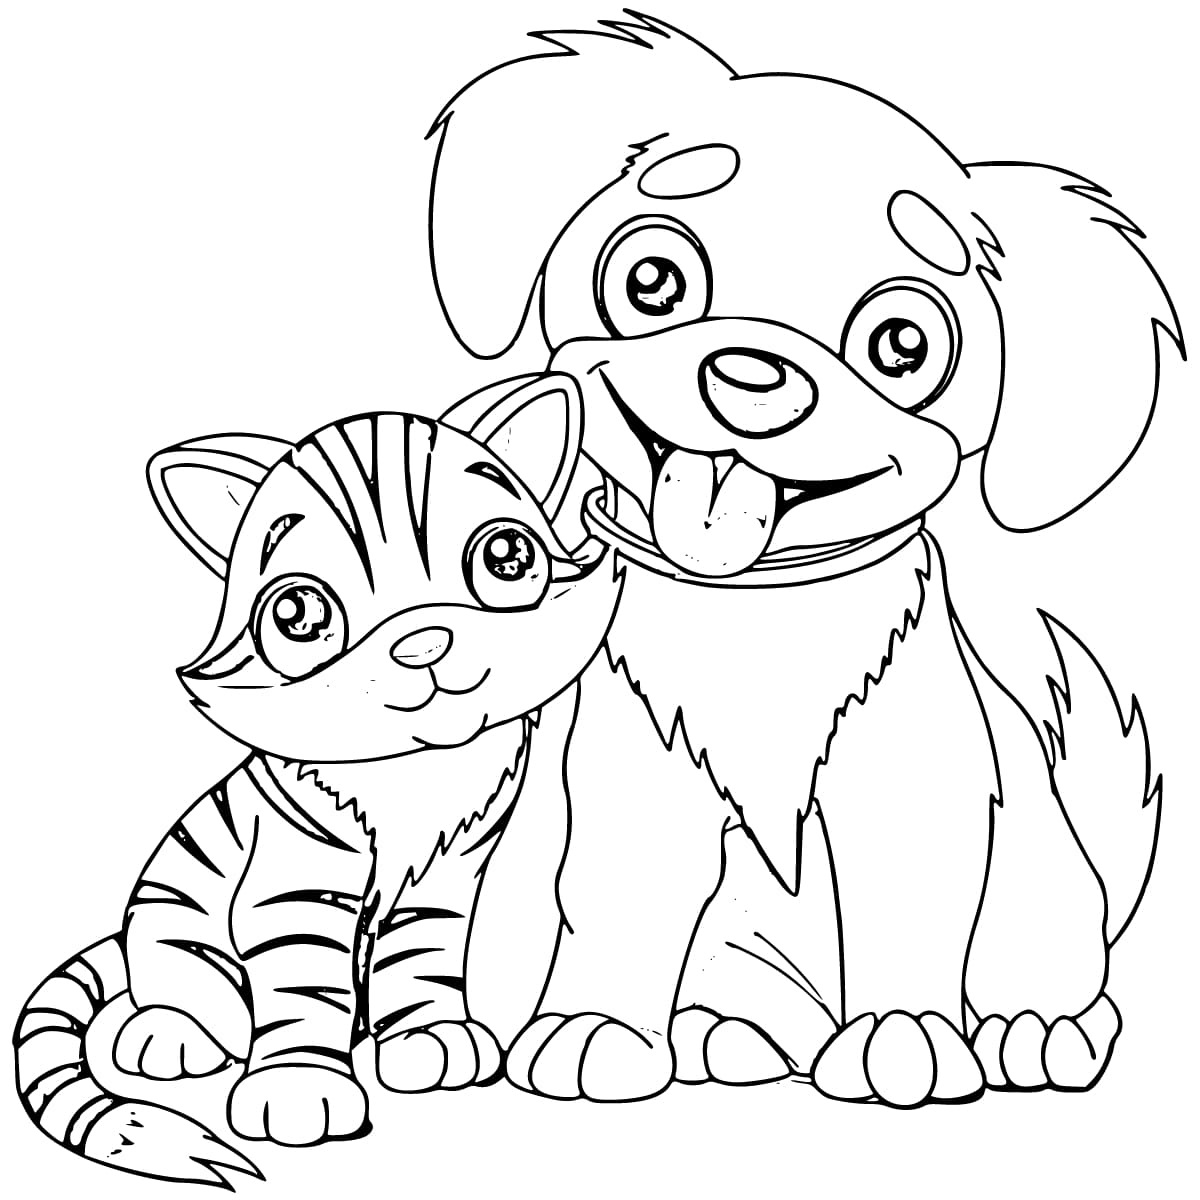 Friendly Dog and Cat coloring page